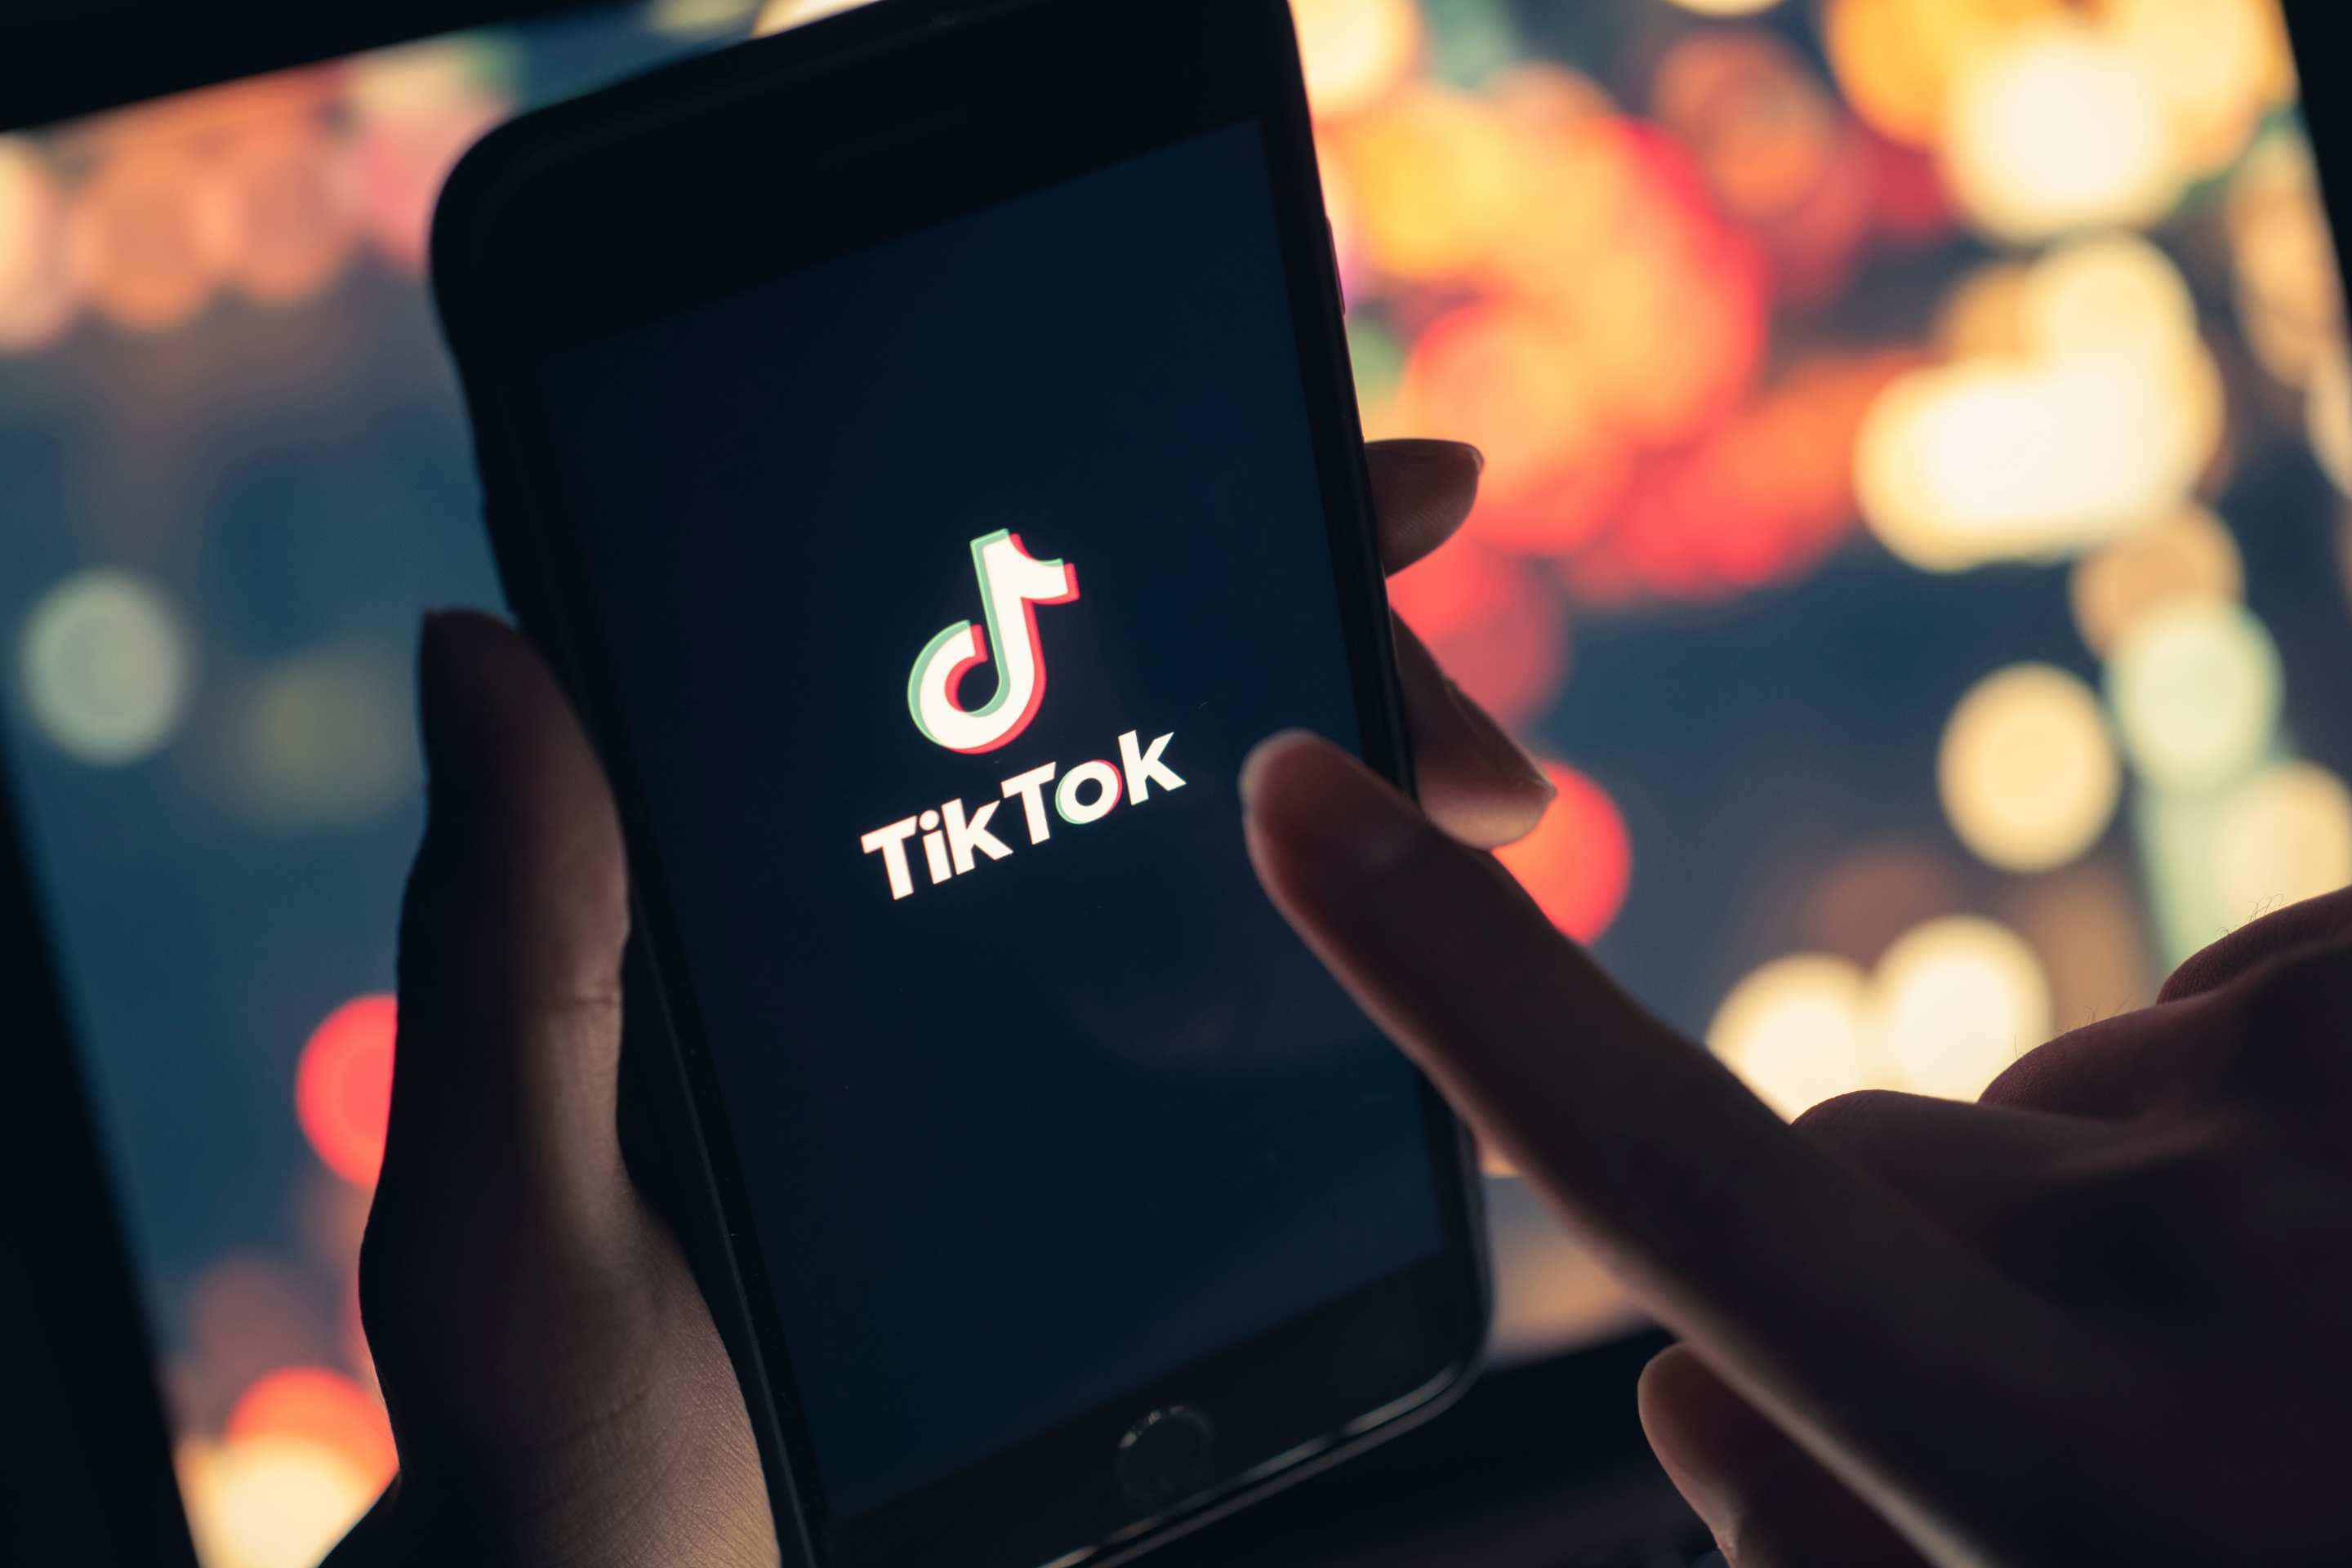 A hand holding a phone with the TikTok logo on the phone's screen.